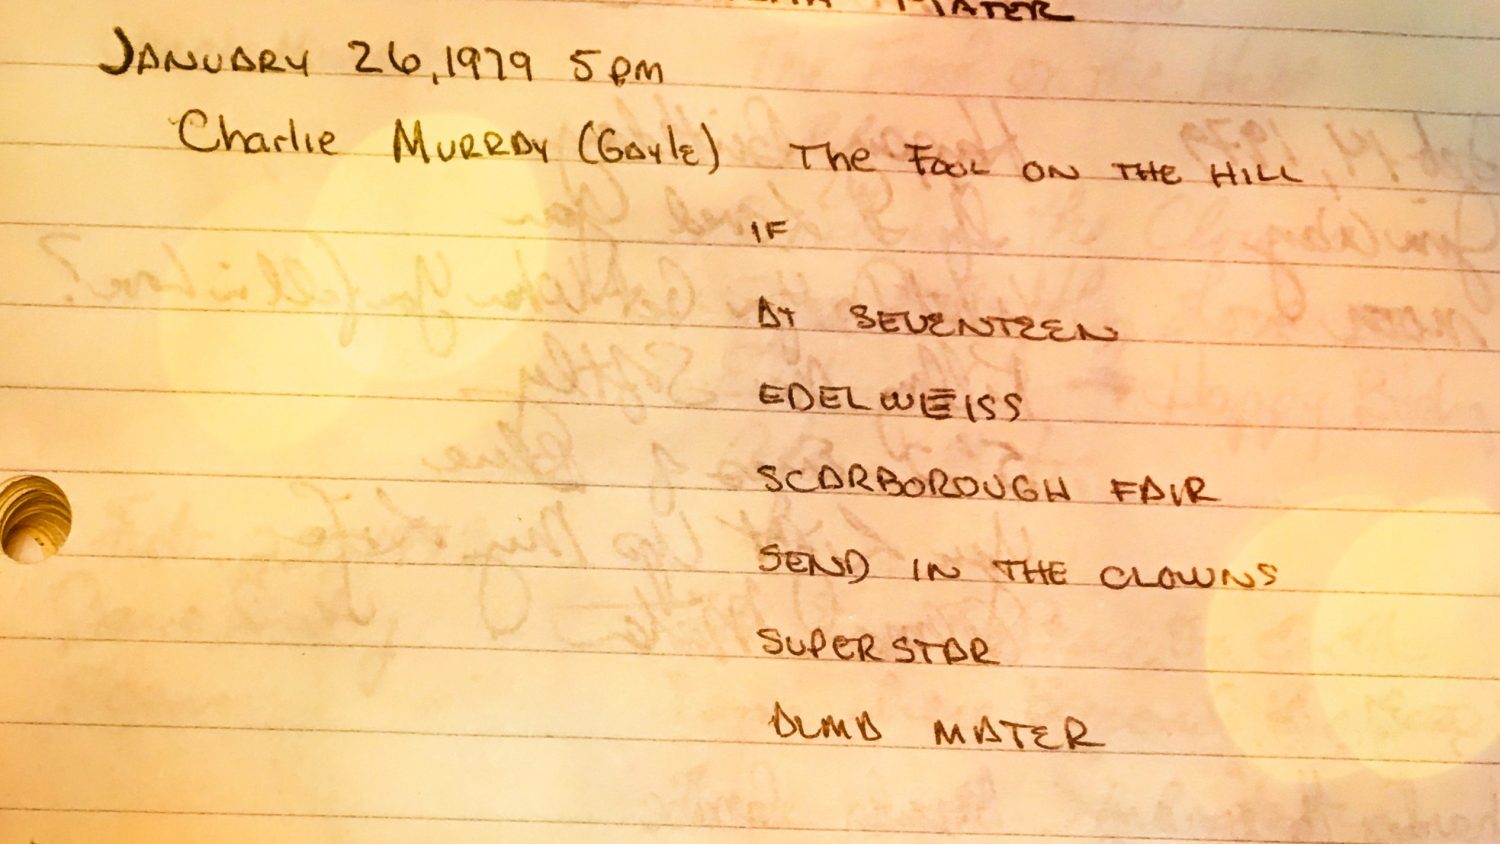 handwritten list of songs played on the carillon on Jan 26, 1979